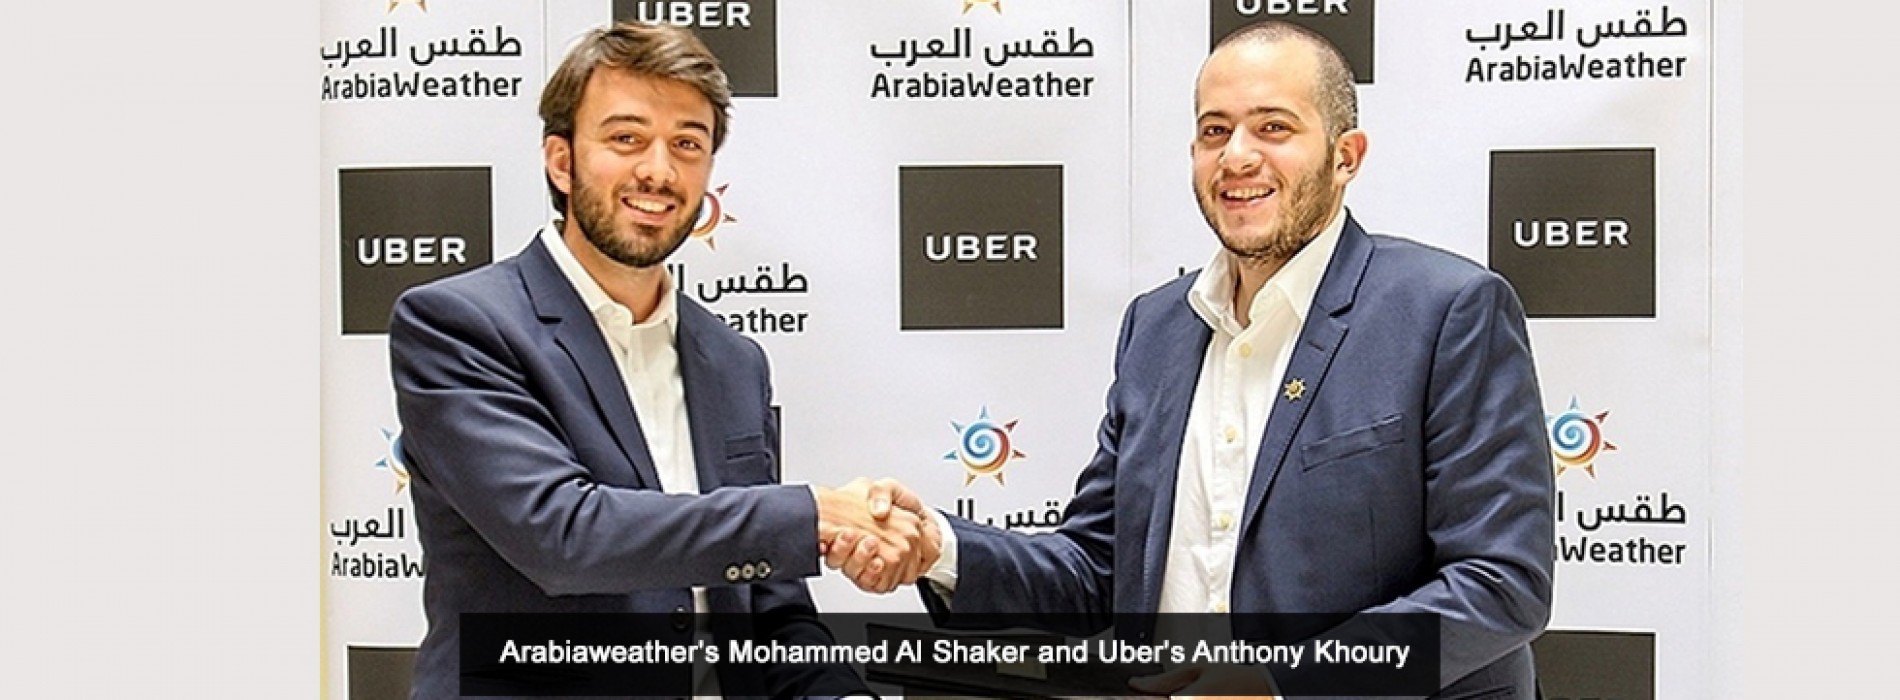 Uber and ArabiaWeather announced a strategic partnership